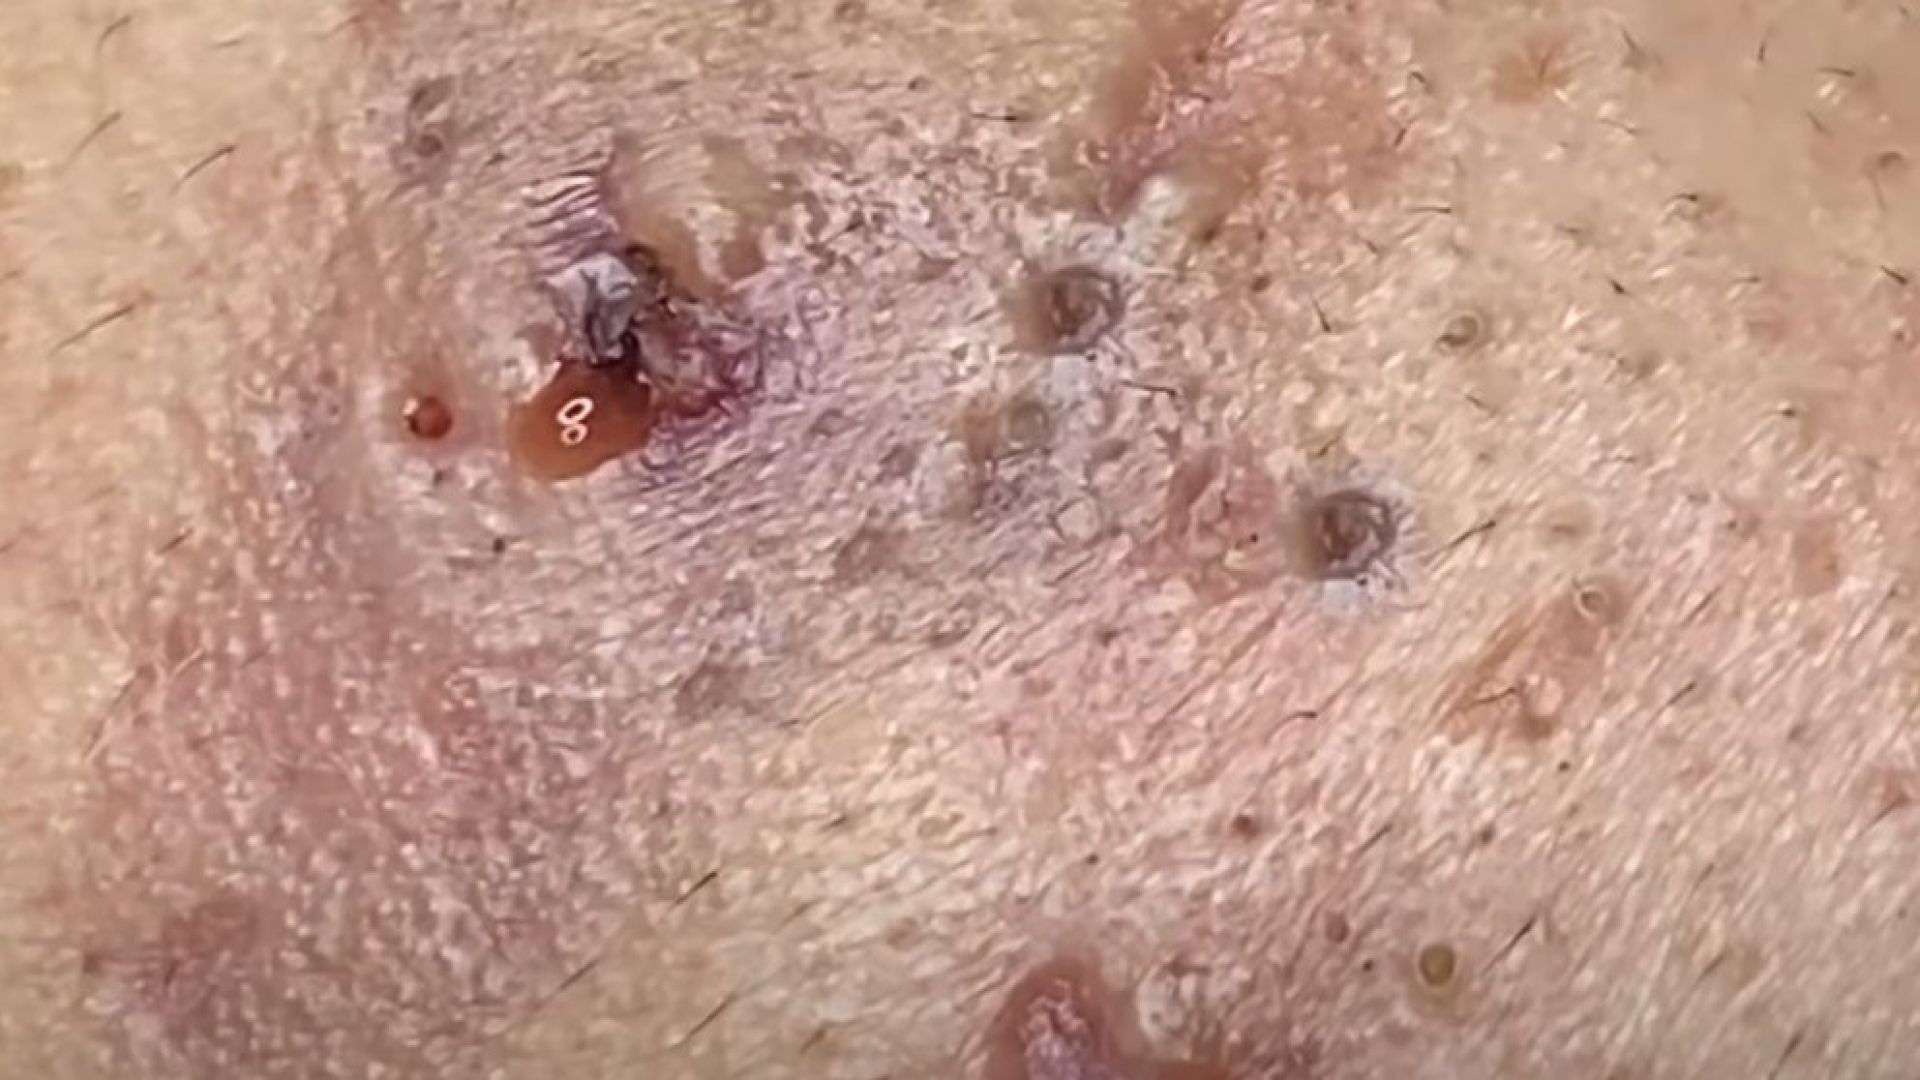 A blackhead popper video that results In, DISASTER?